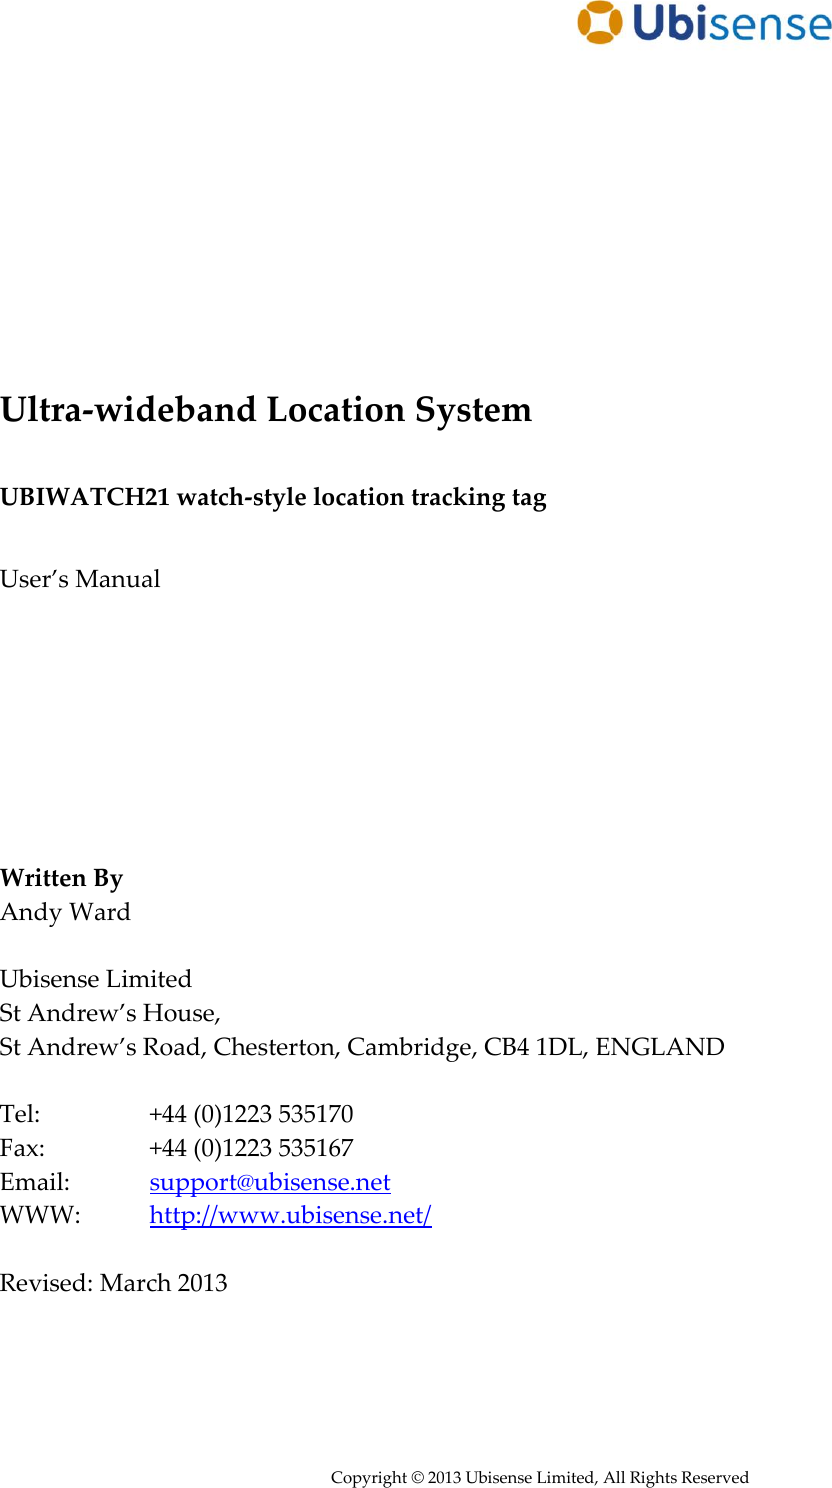      Copyright © 2013 Ubisense Limited, All Rights Reserved            Ultra-wideband Location System  UBIWATCH21 watch-style location tracking tag  User’s Manual         Written By Andy Ward  Ubisense Limited St Andrew’s House,  St Andrew’s Road, Chesterton, Cambridge, CB4 1DL, ENGLAND  Tel:     +44 (0)1223 535170 Fax:     +44 (0)1223 535167 Email:    support@ubisense.net WWW:   http://www.ubisense.net/  Revised: March 2013   